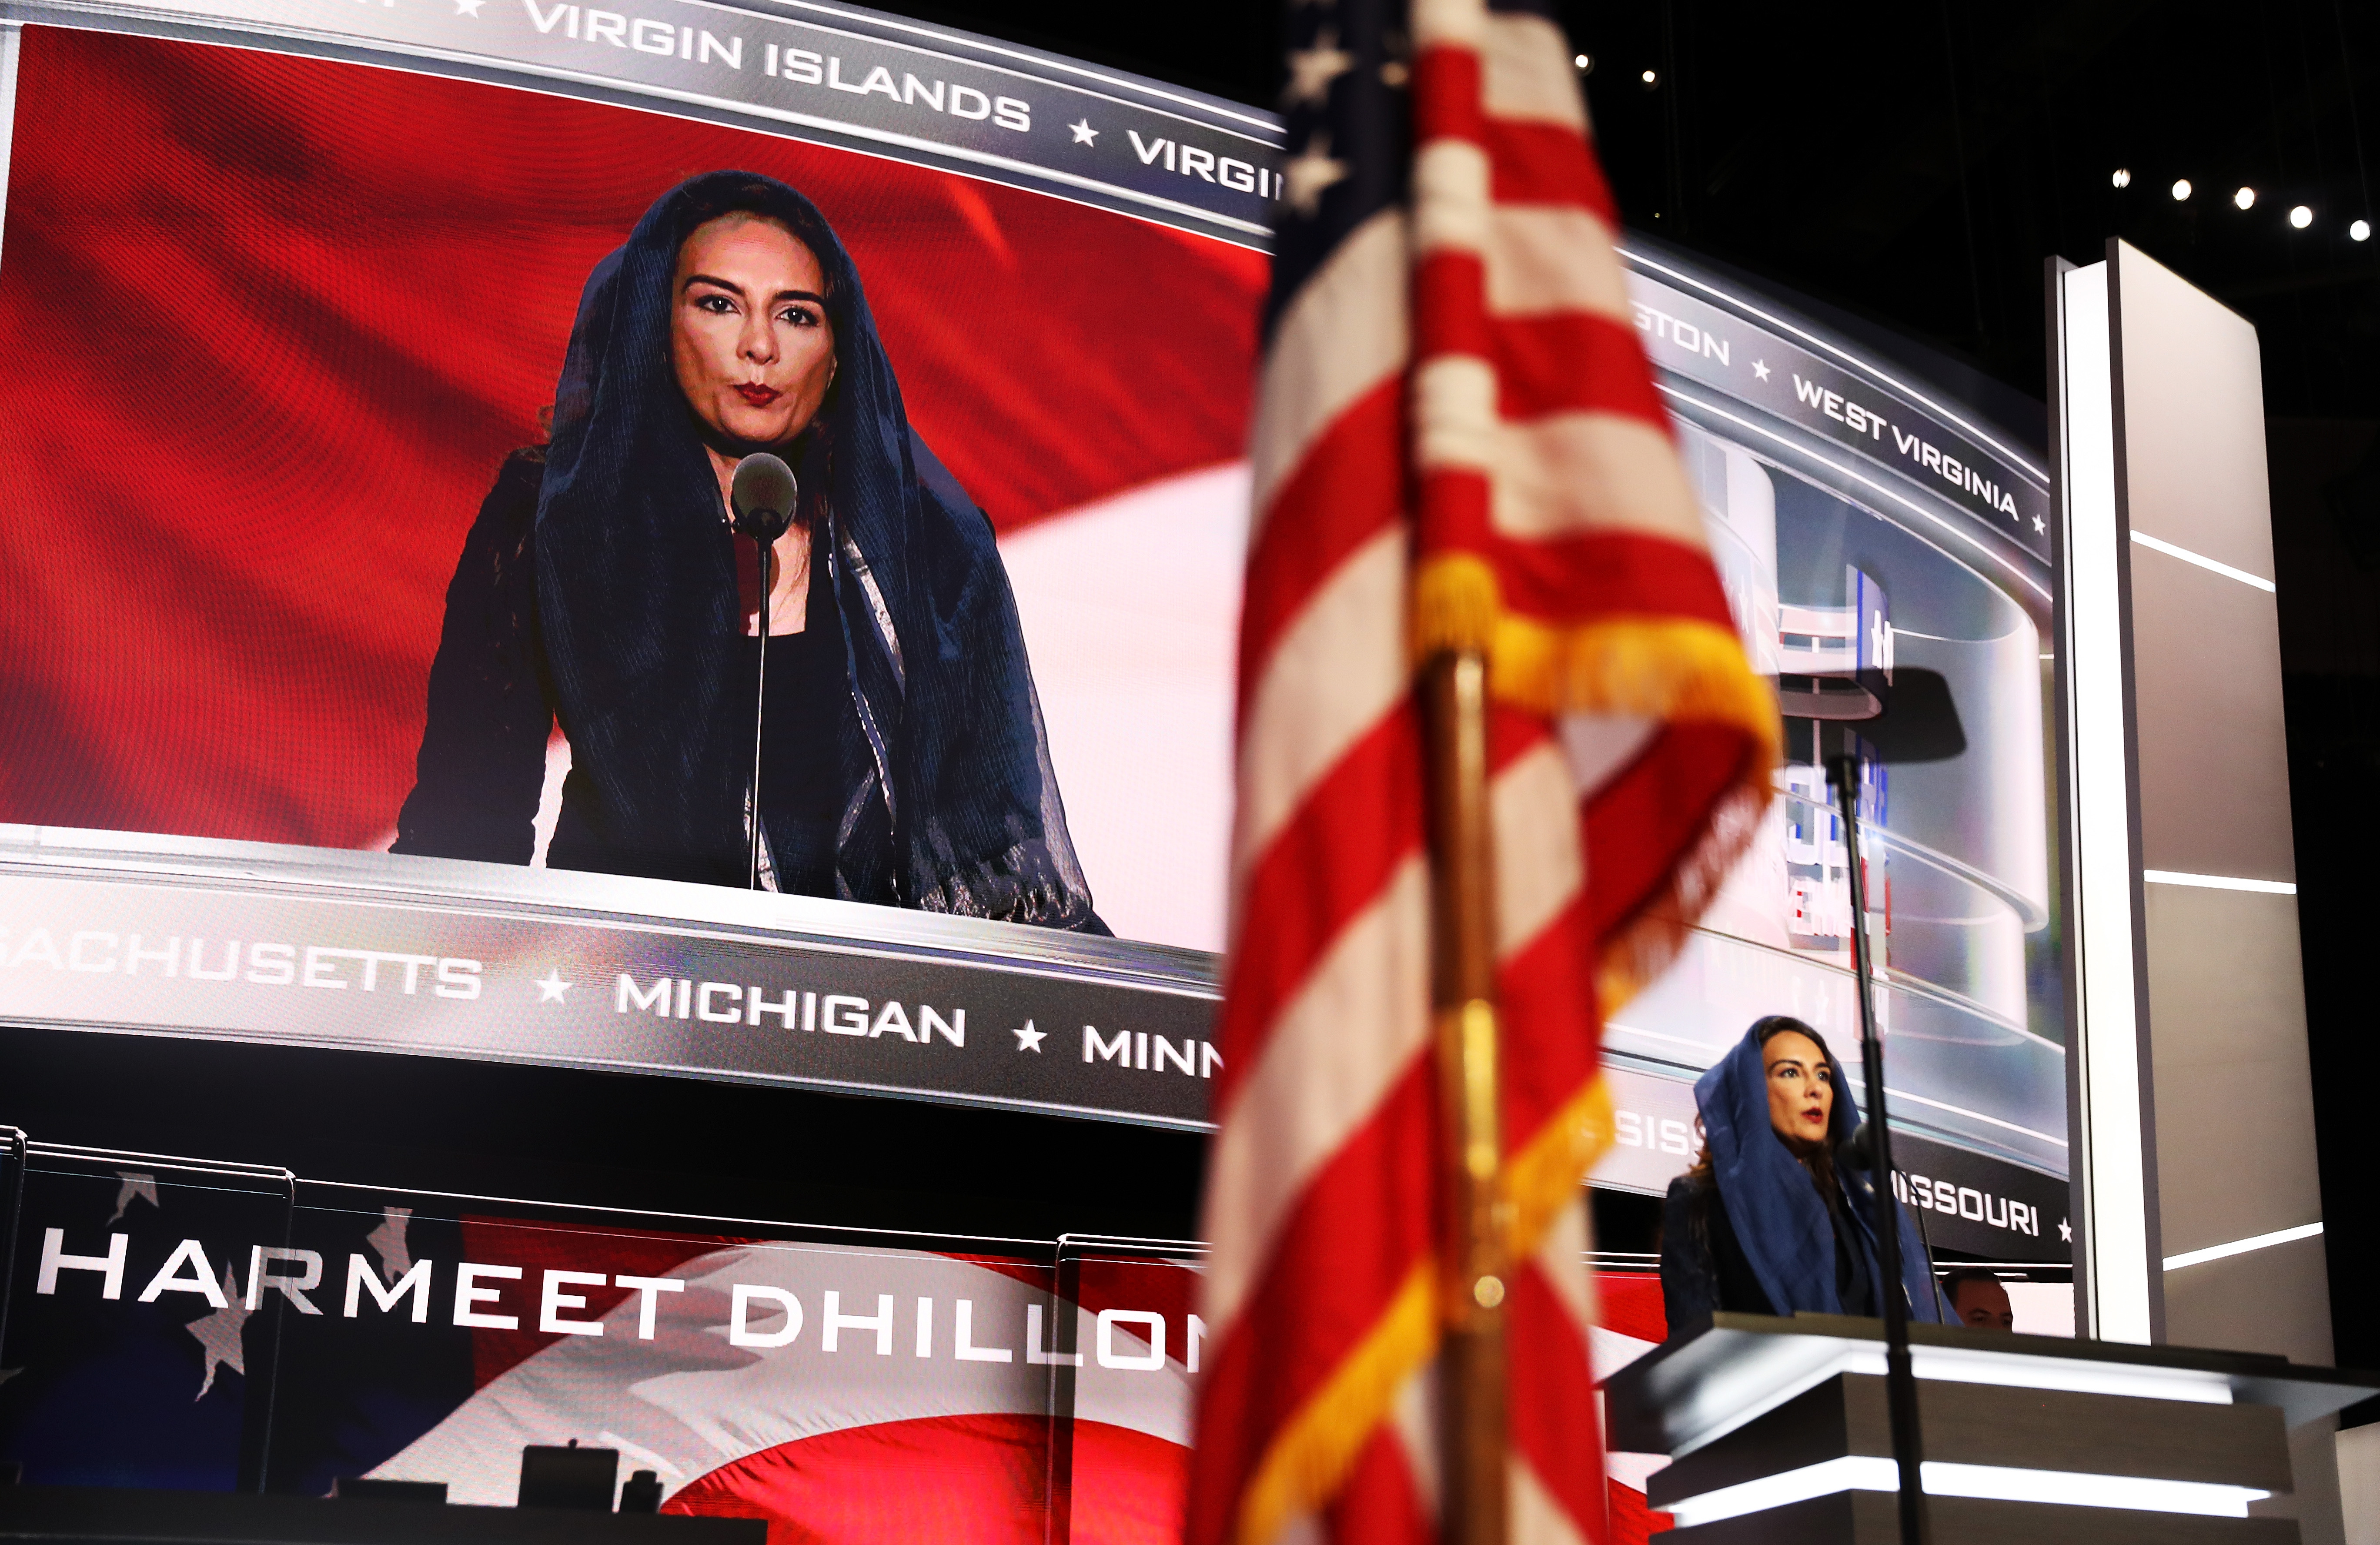 Harmeet Dhillon prays during the opening of the second day of the Republican National Convention on July 19, 2016, at the Quicken Loans Arena in Cleveland, Ohio.